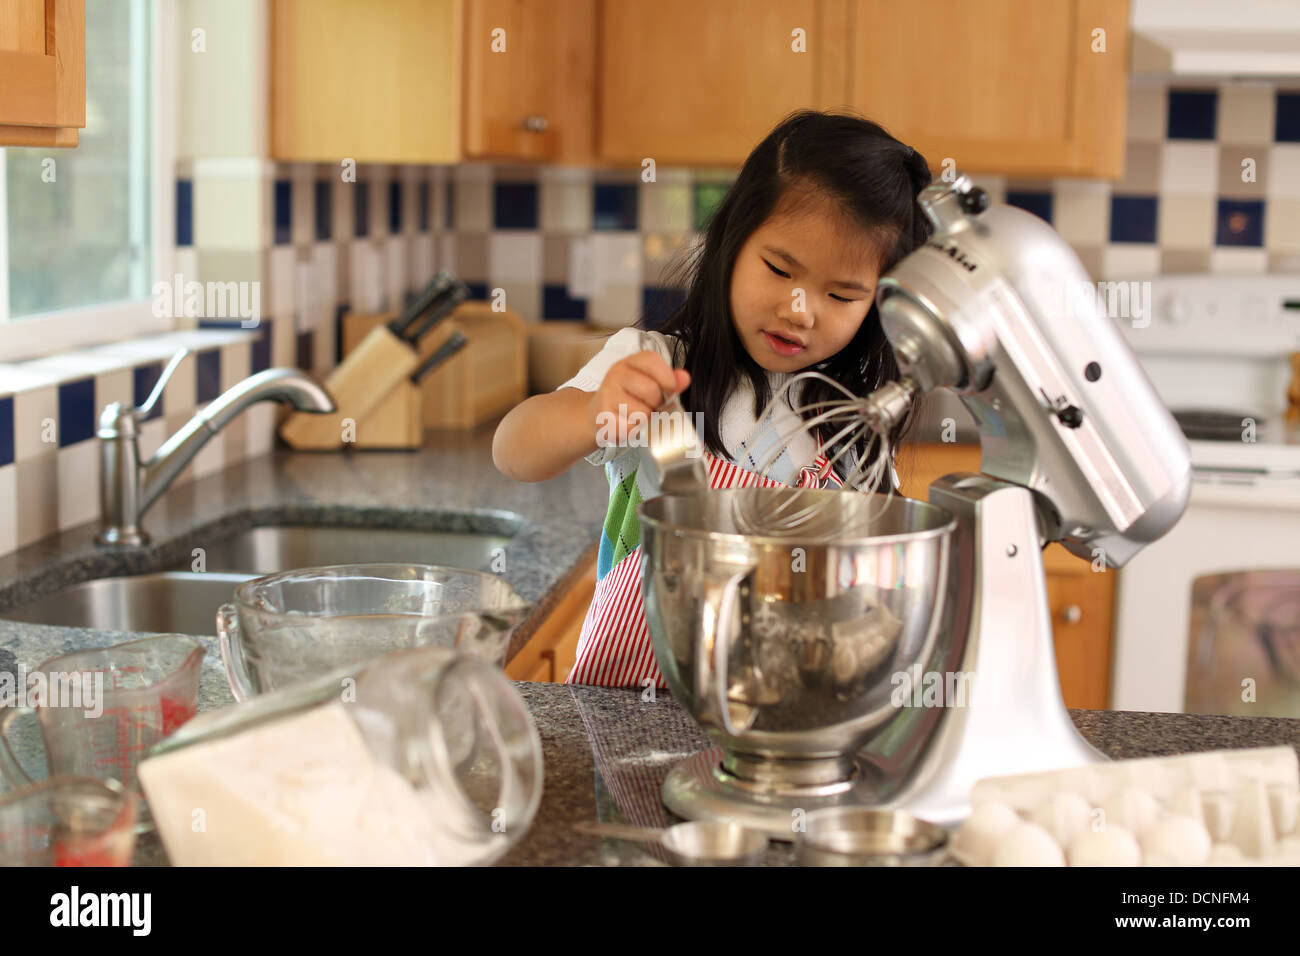 Young girl helping mother bake in kitchen Stock Photo